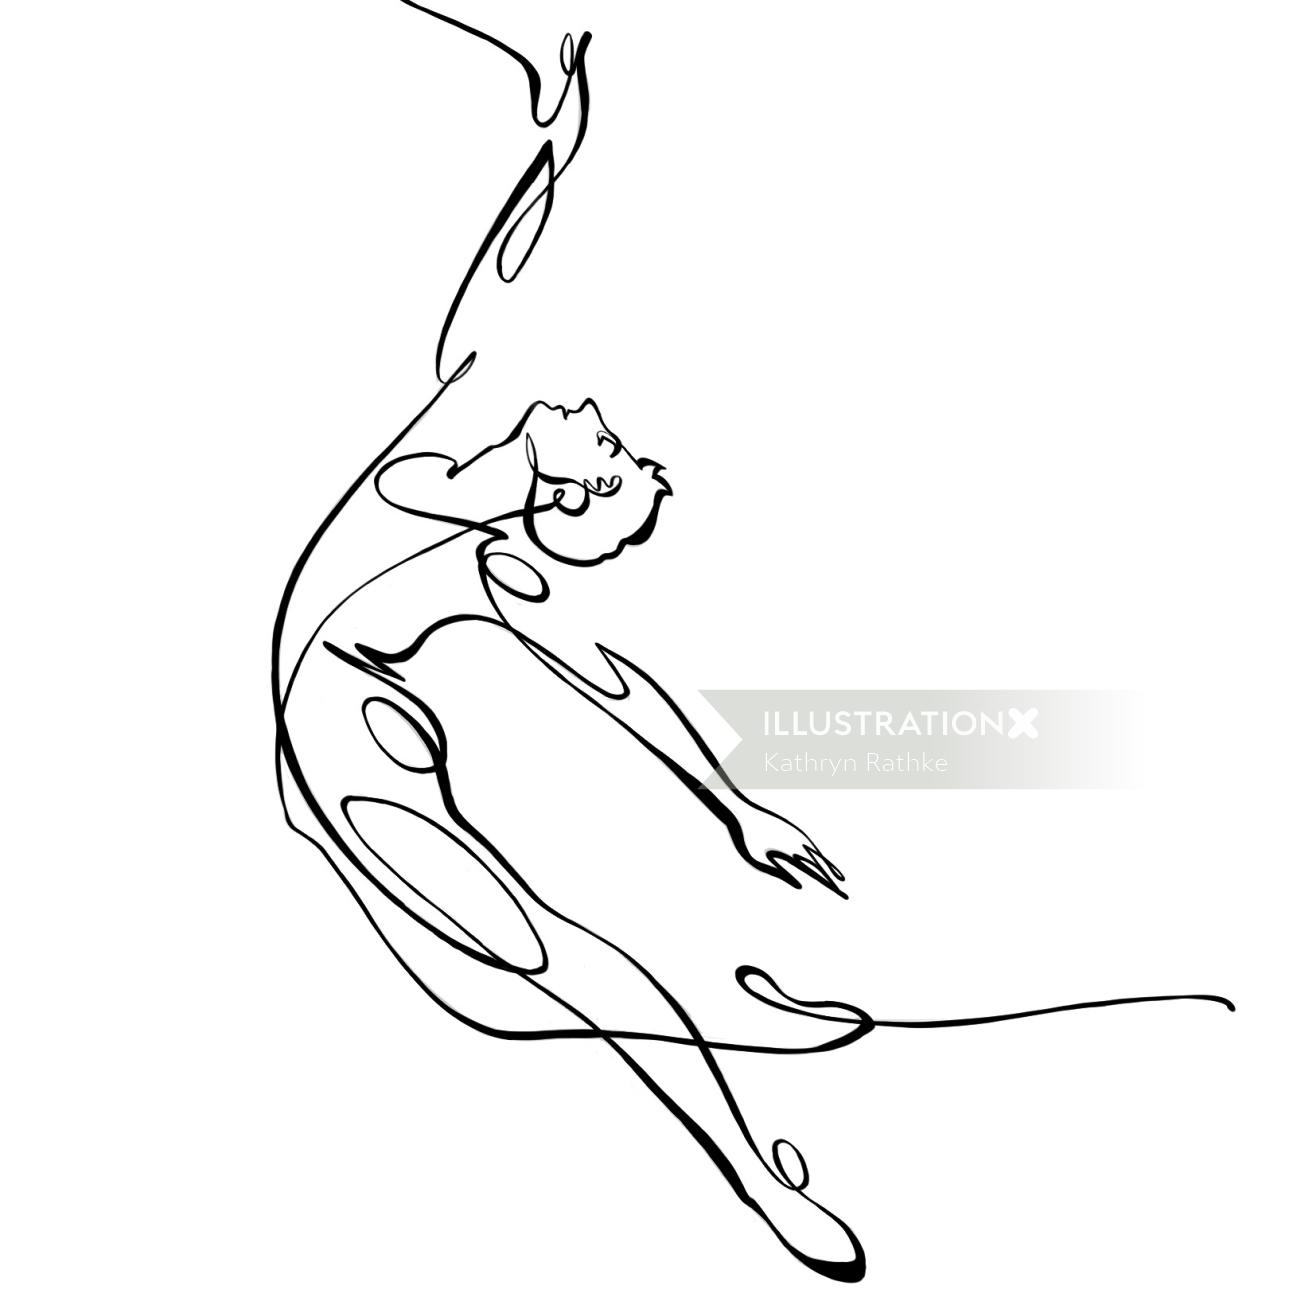 GIF animation of a single line drawing of a ballet dancer